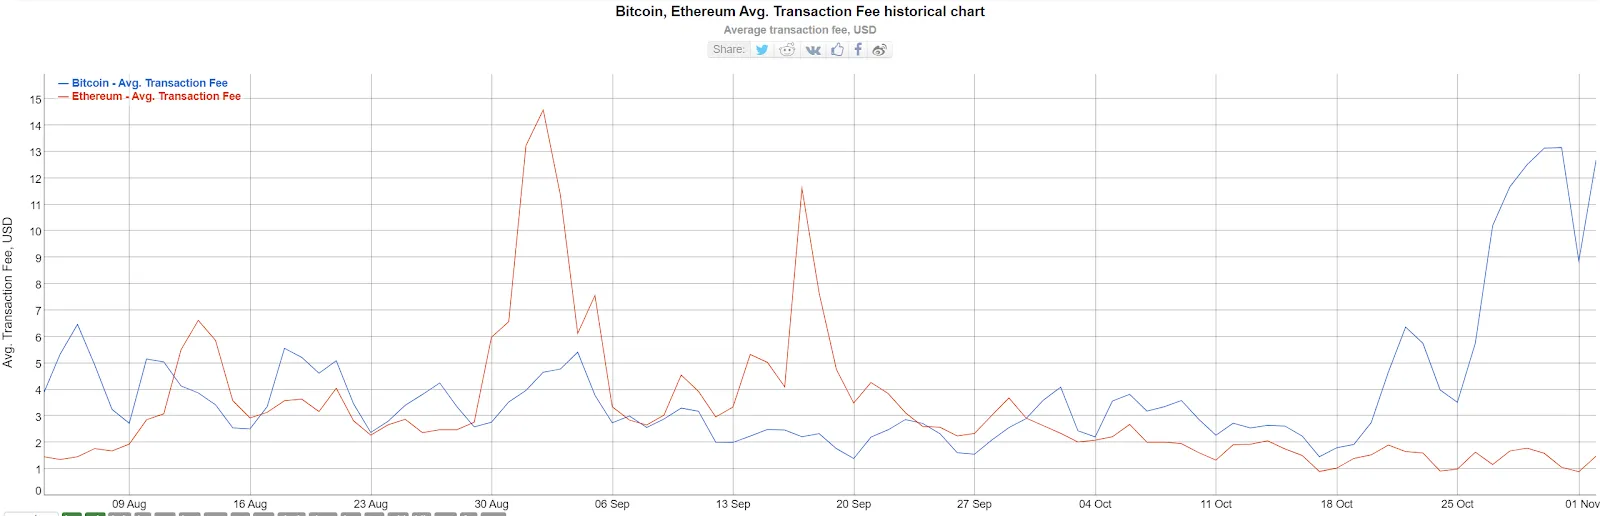 Bitcoin and Ethereum average transaction fees over time.